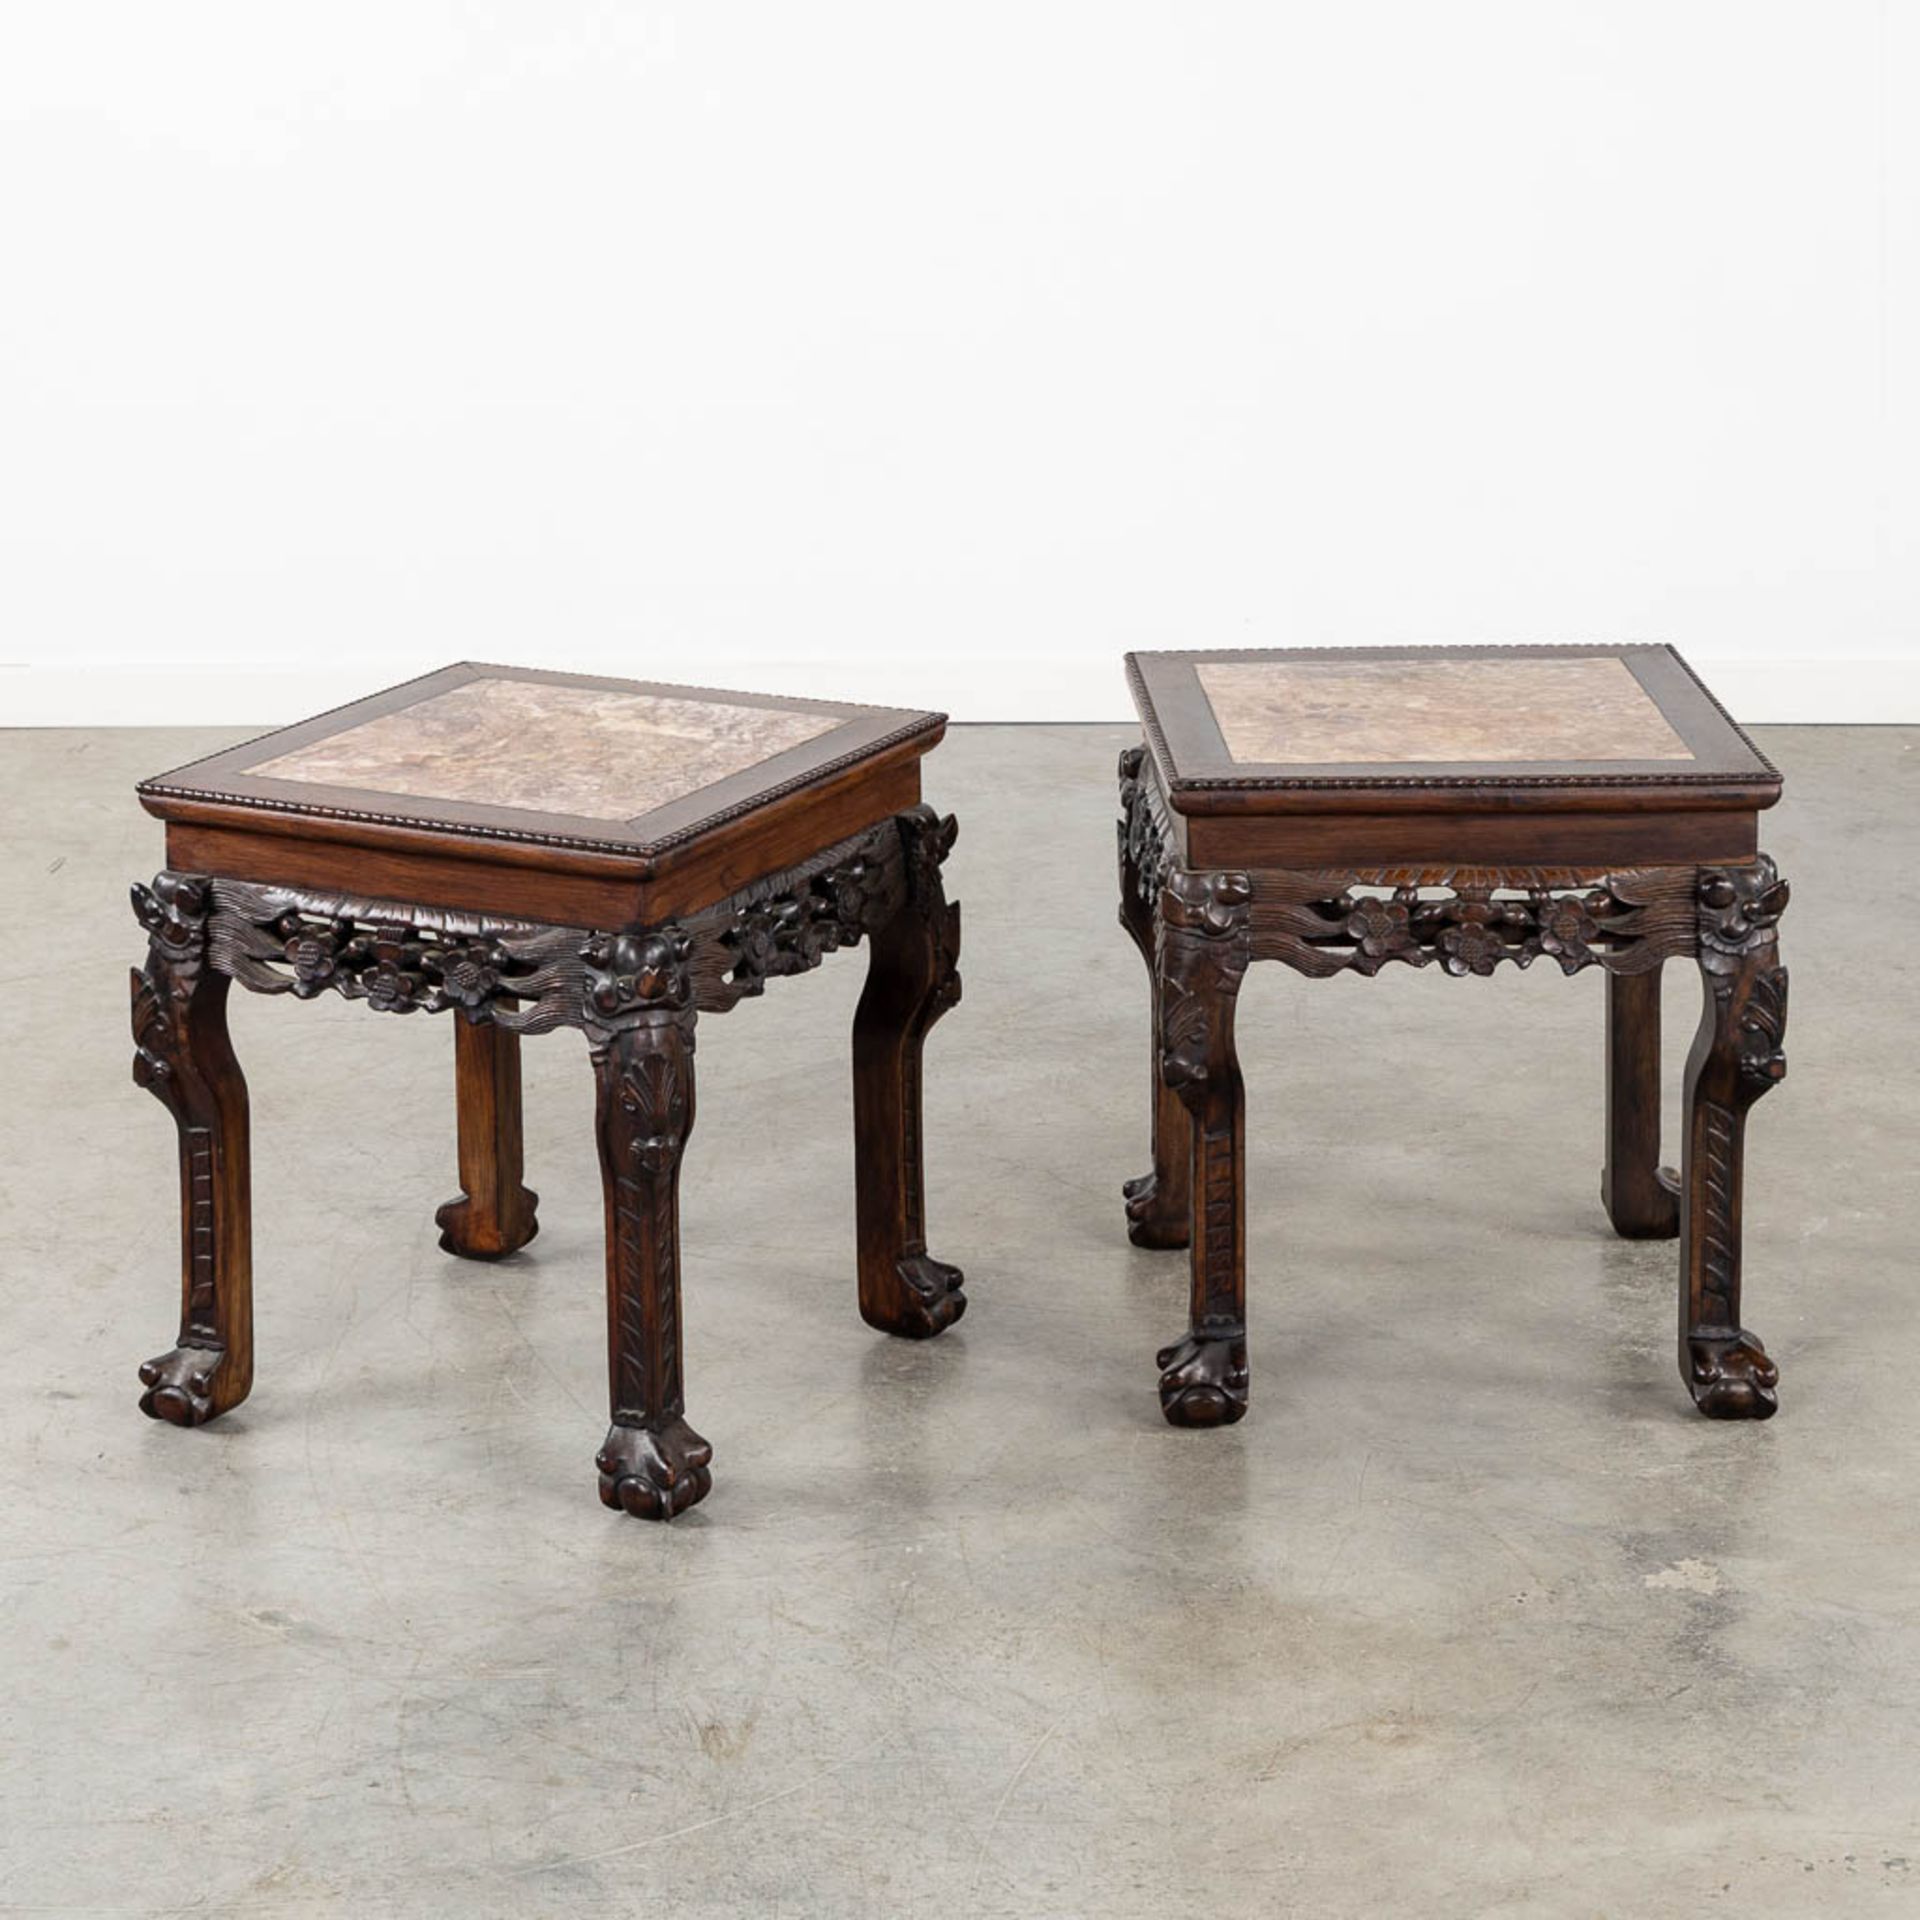 A pair of square Chinese side tables, hardwood with a marble top. (L:44 x W:44 x H:46 cm)